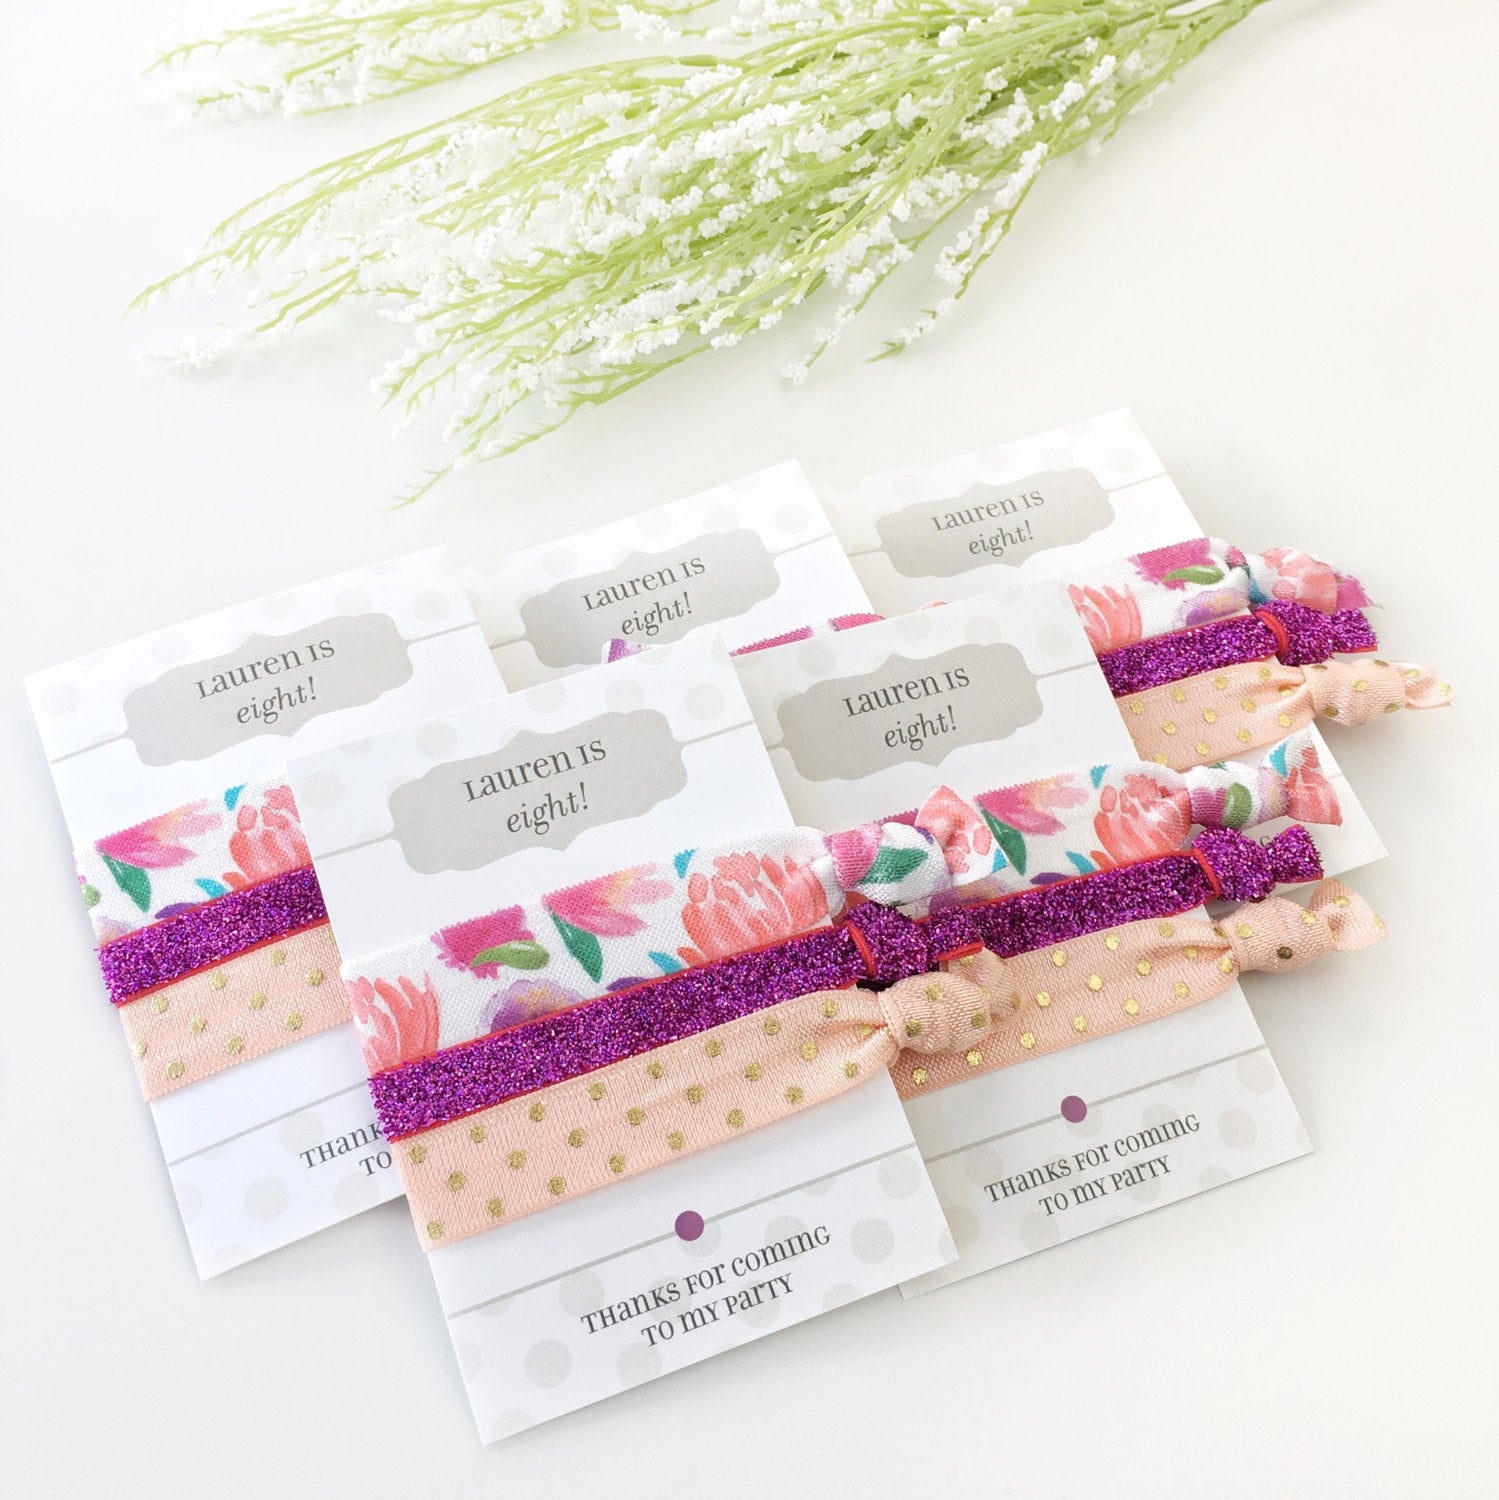 Floral Party Favors for Girls, Personalized Birthday Party Favors, Hair Tie Favors, Floral Birthday Decorations, Girls Party Favors - @PlumPolkaDot 